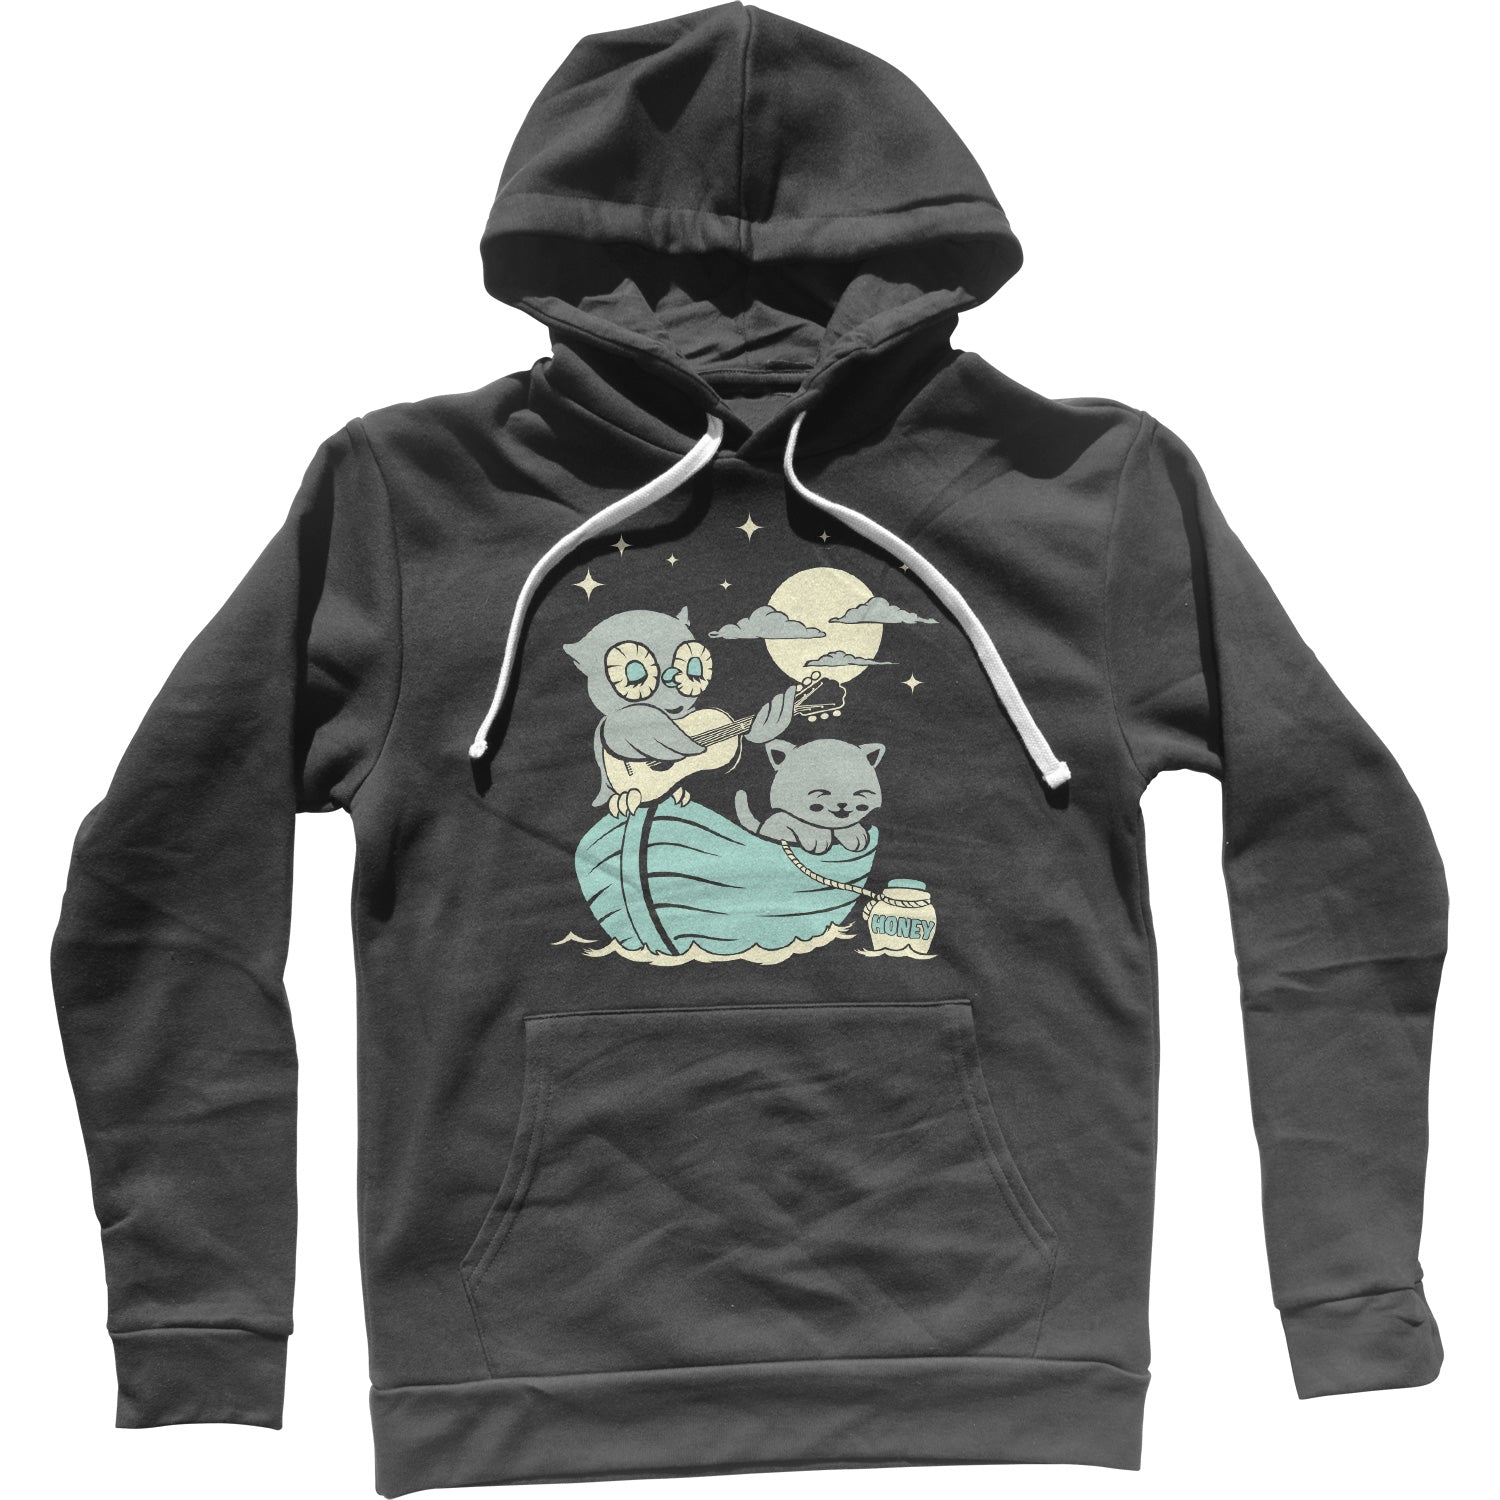 The Owl And the Pussycat Unisex Hoodie